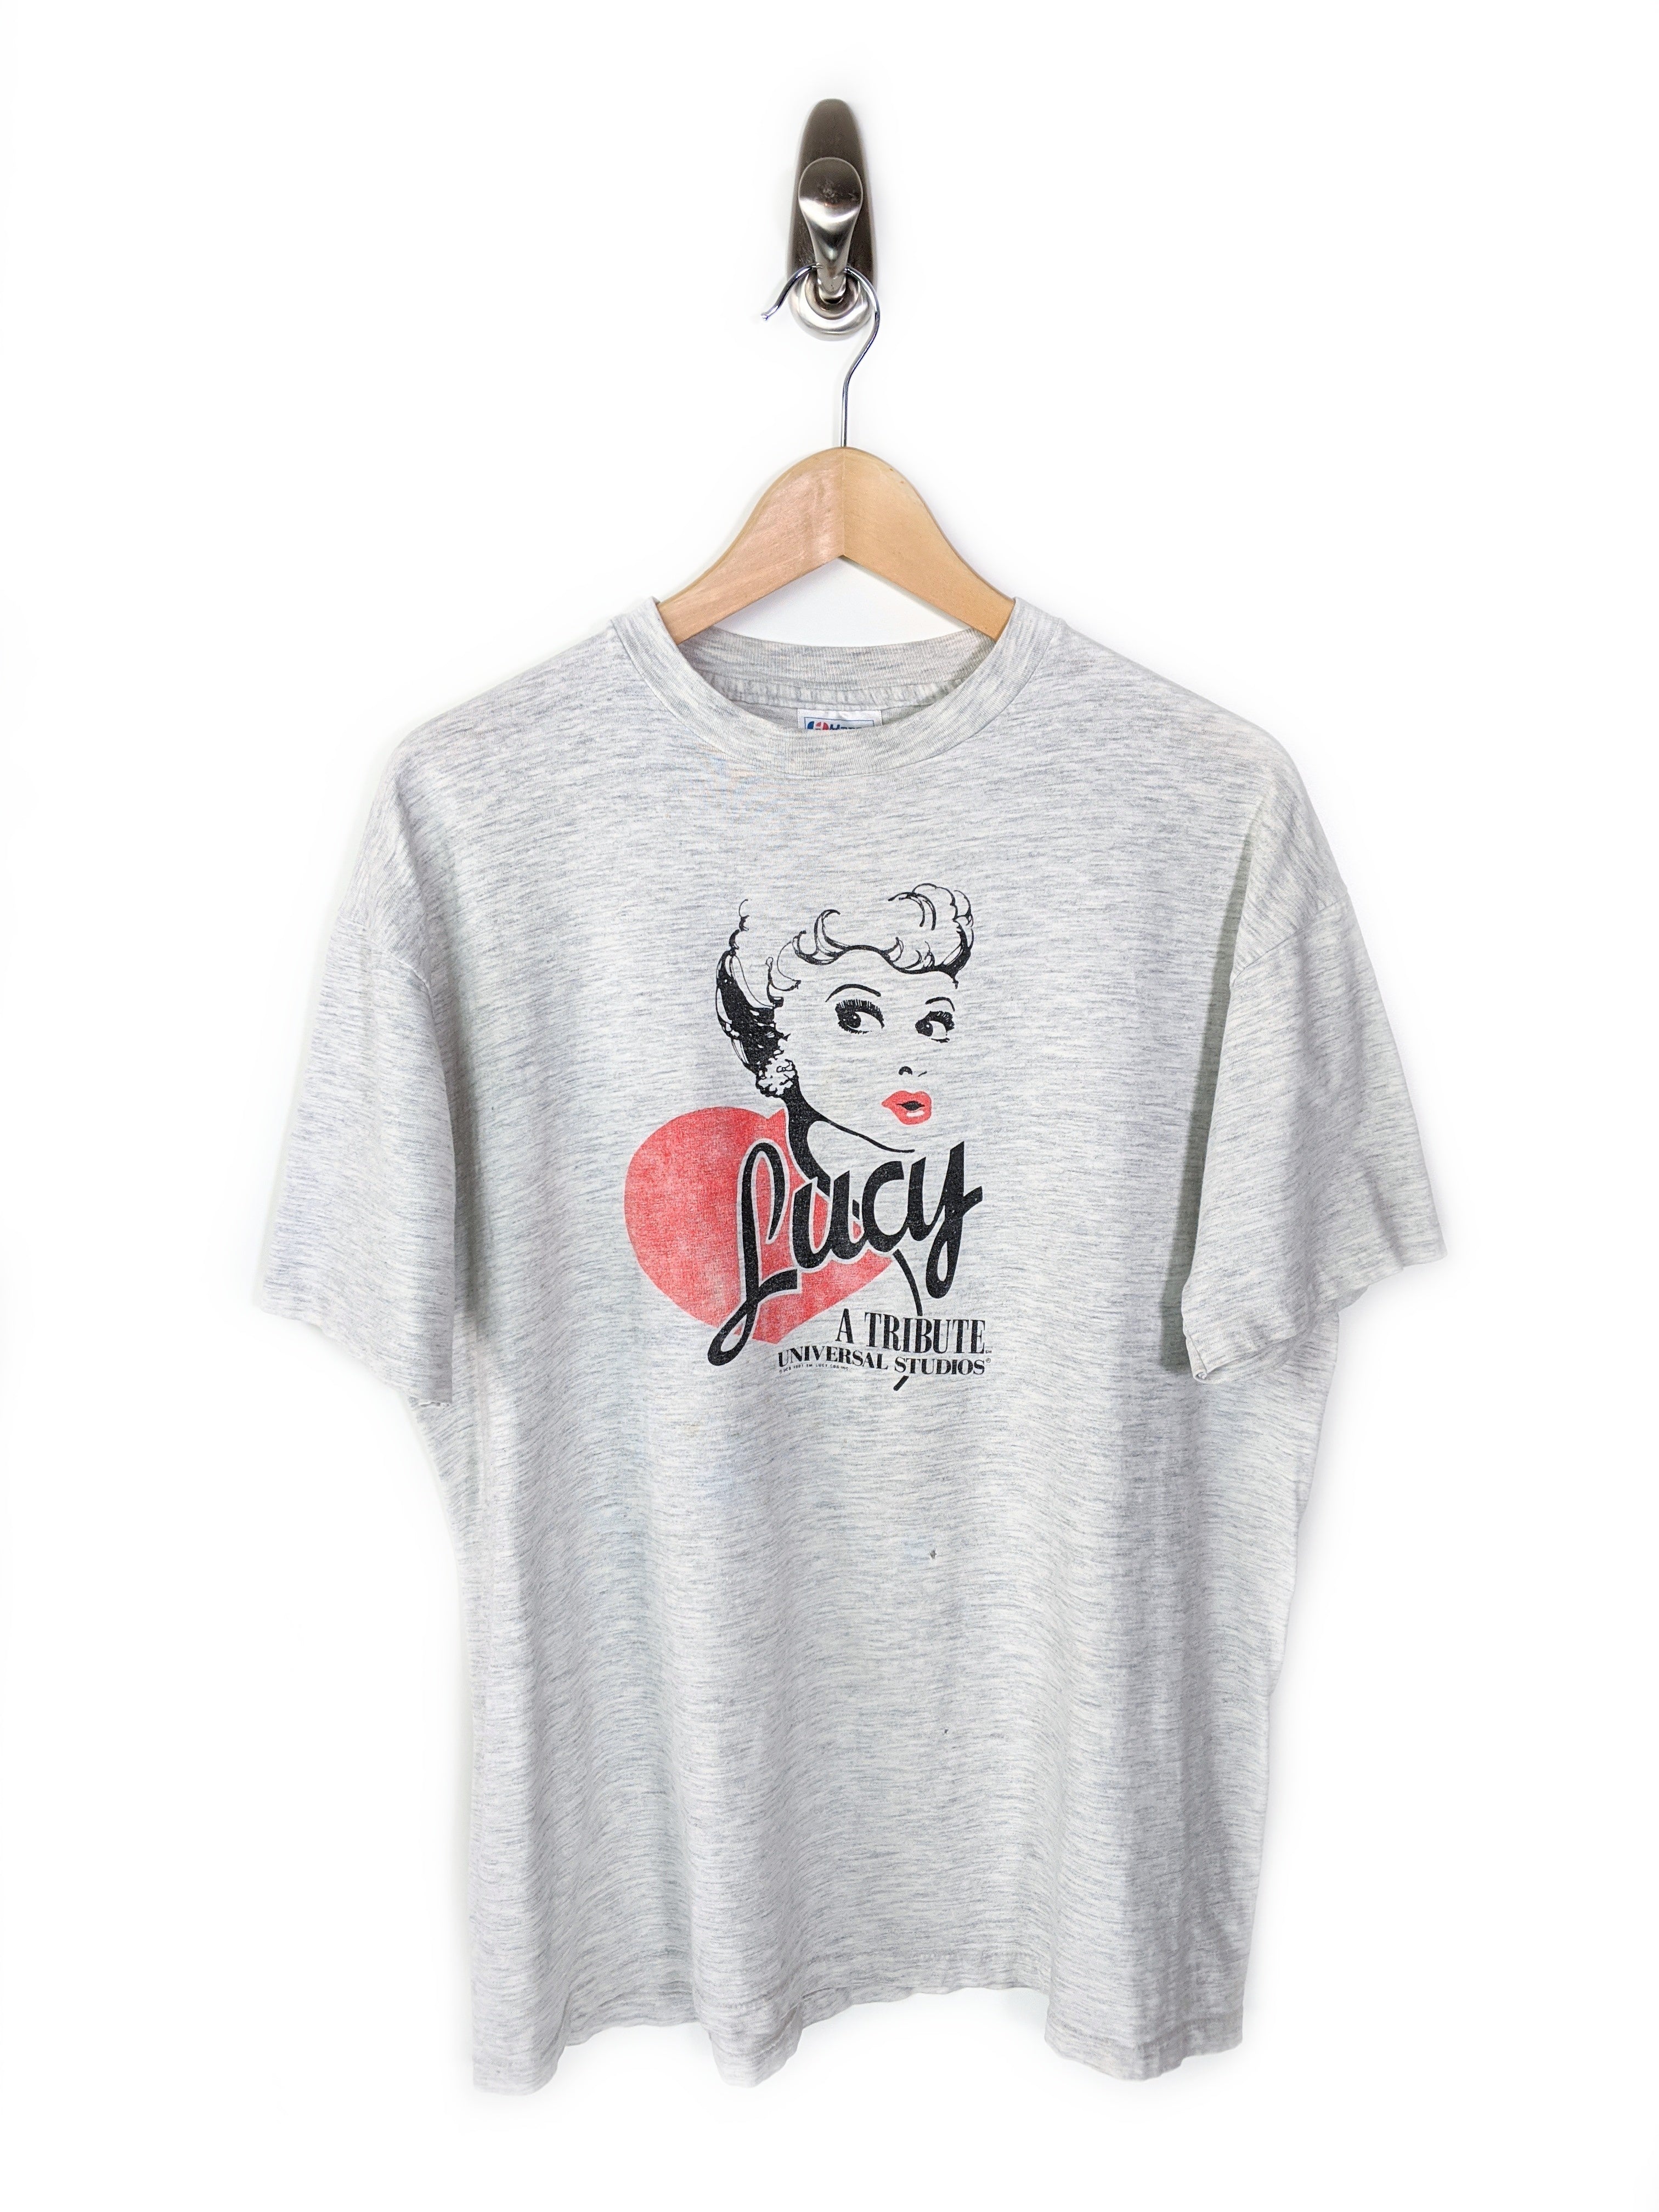 91 I Love Lucy Tribute Tee (L)